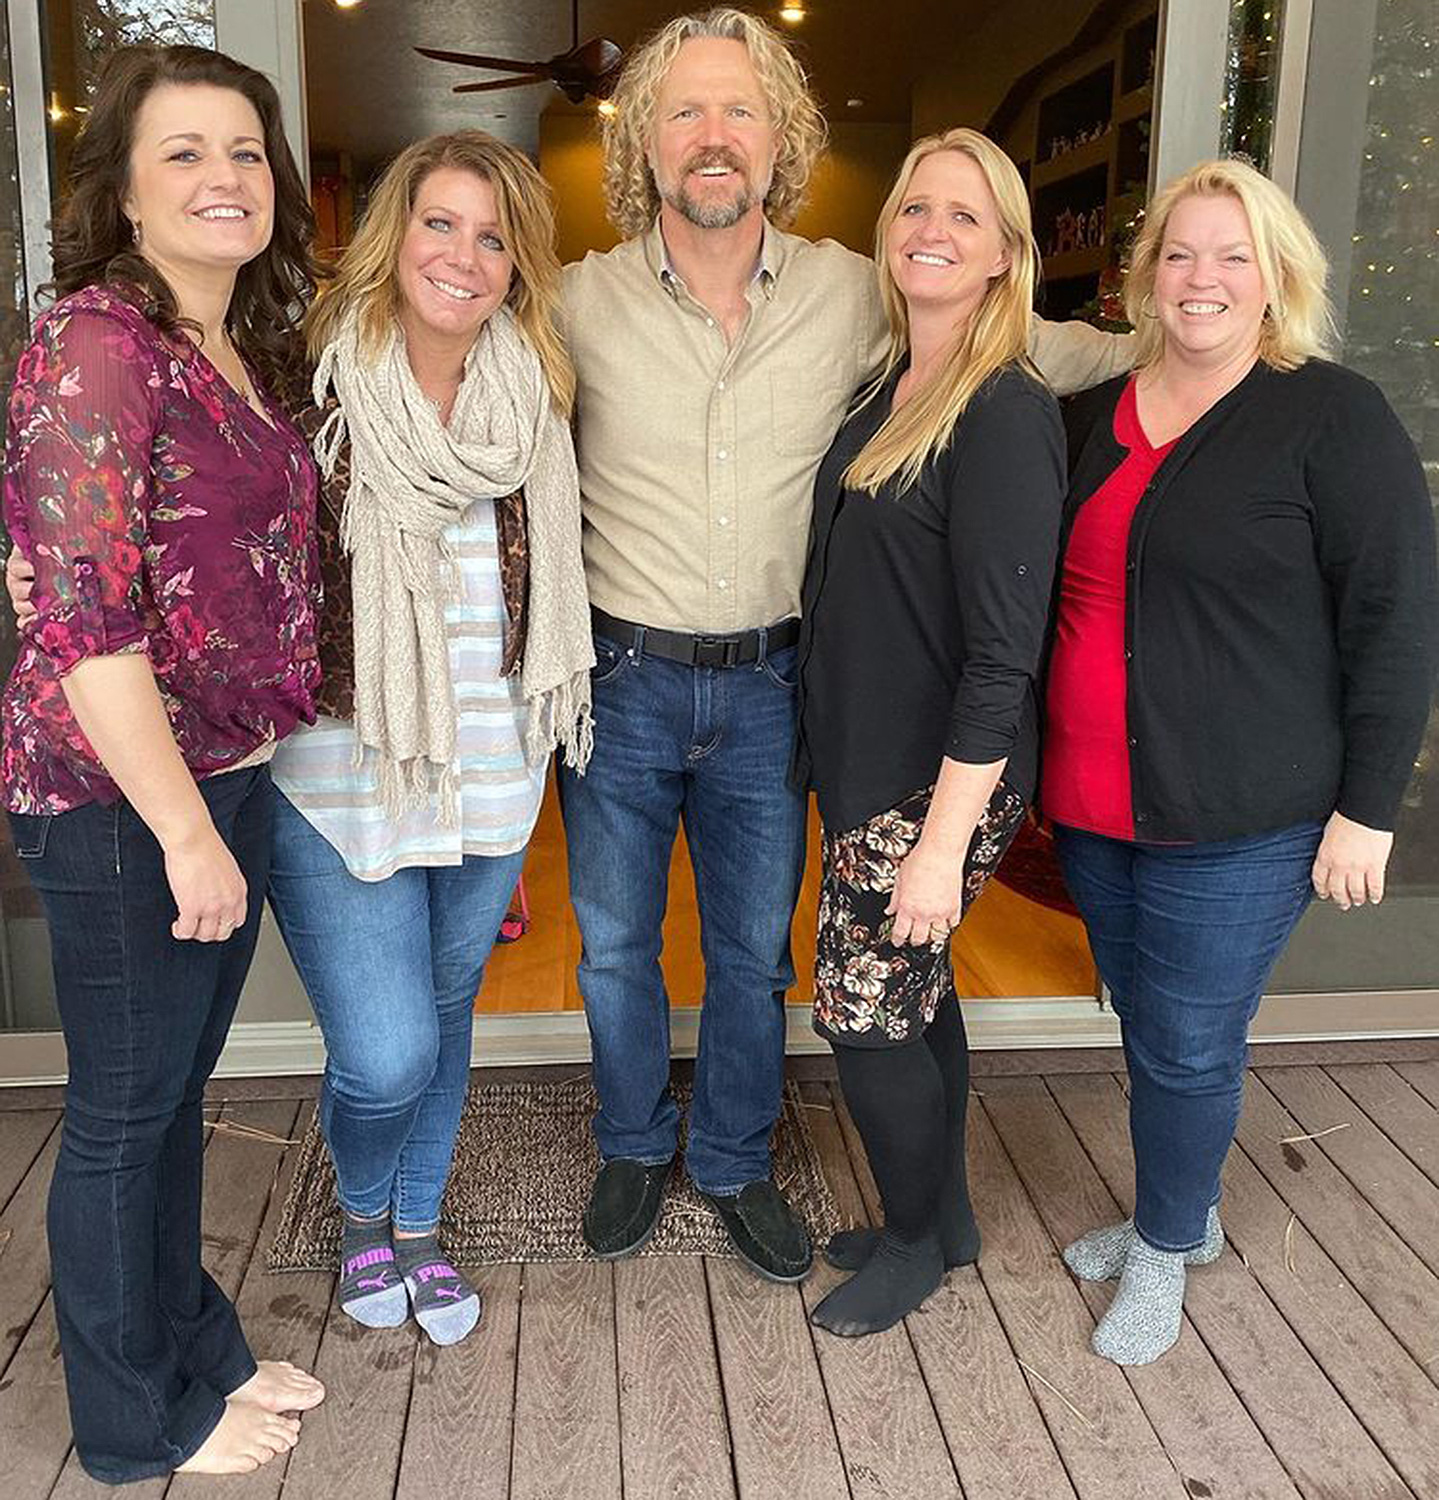 Sister Wives Here's The REAL DEAL Behind Kody & Robyn's Business